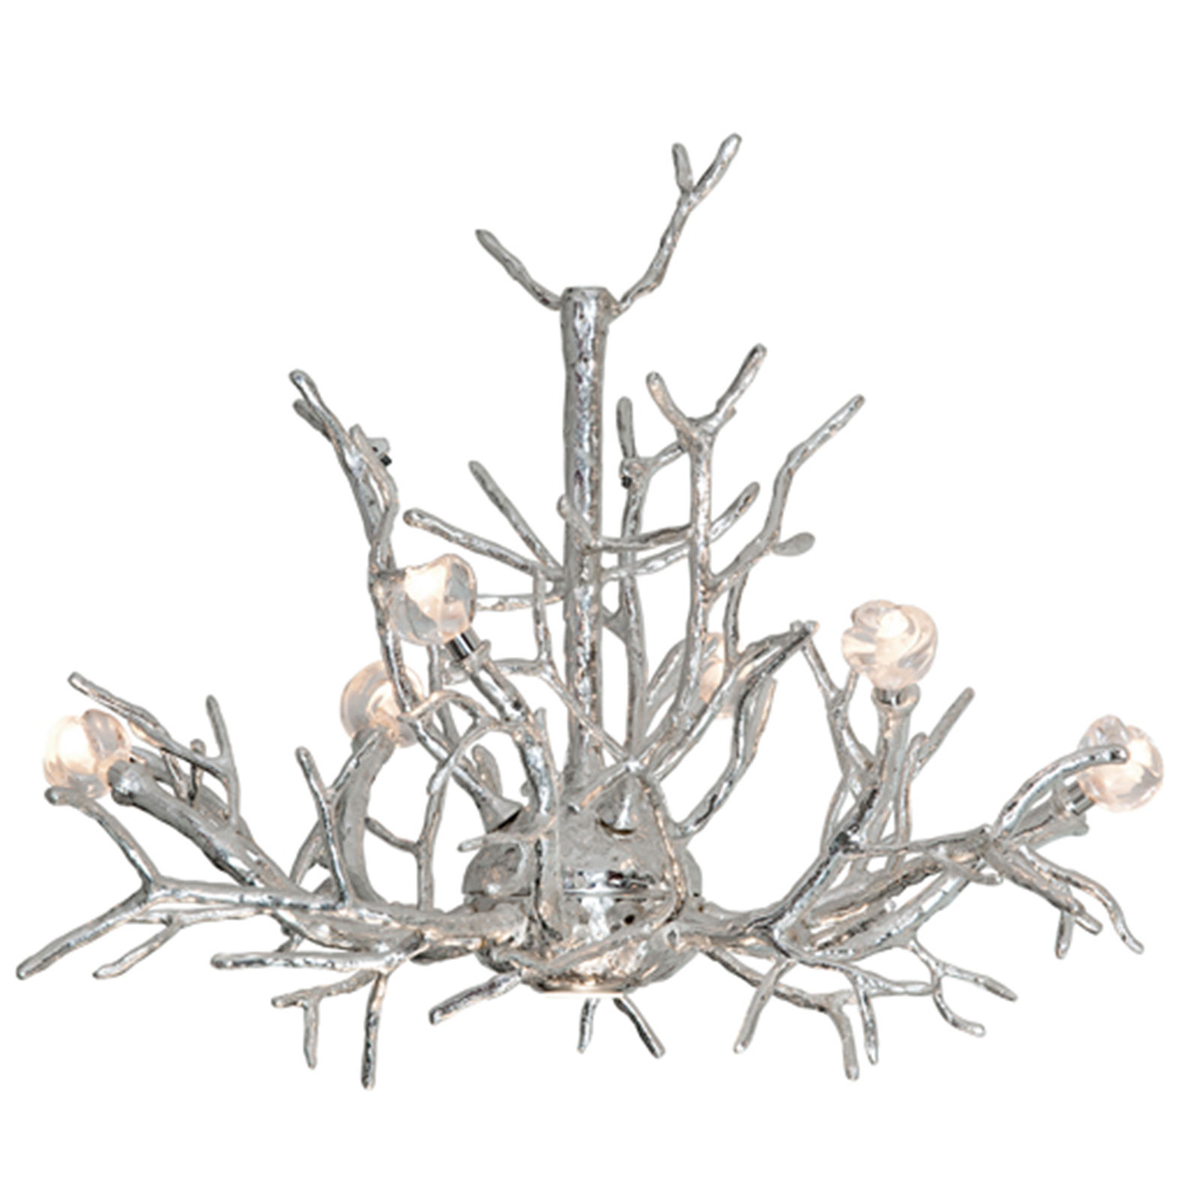 Twiggy Small Hanging Lamp, Silver